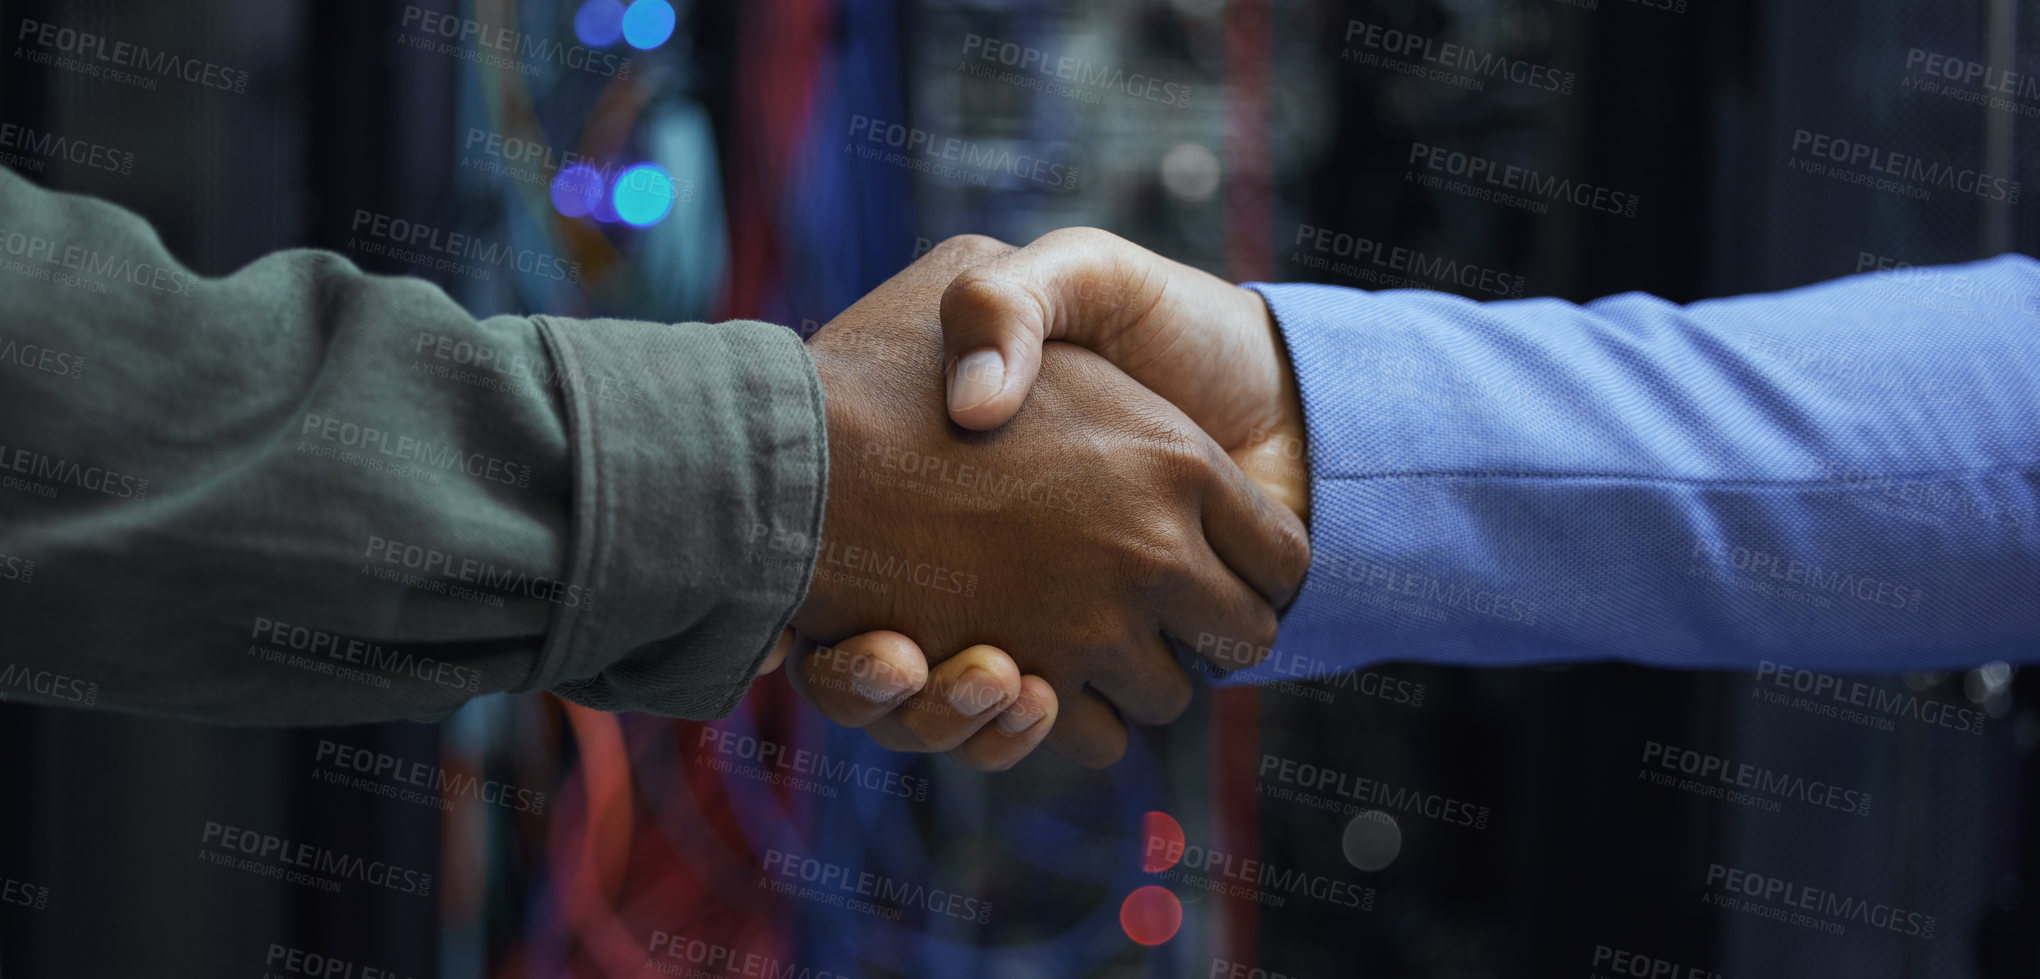 Buy stock photo Cropped shot of two unrecognizable male IT support agents shaking hands in a dark network server room